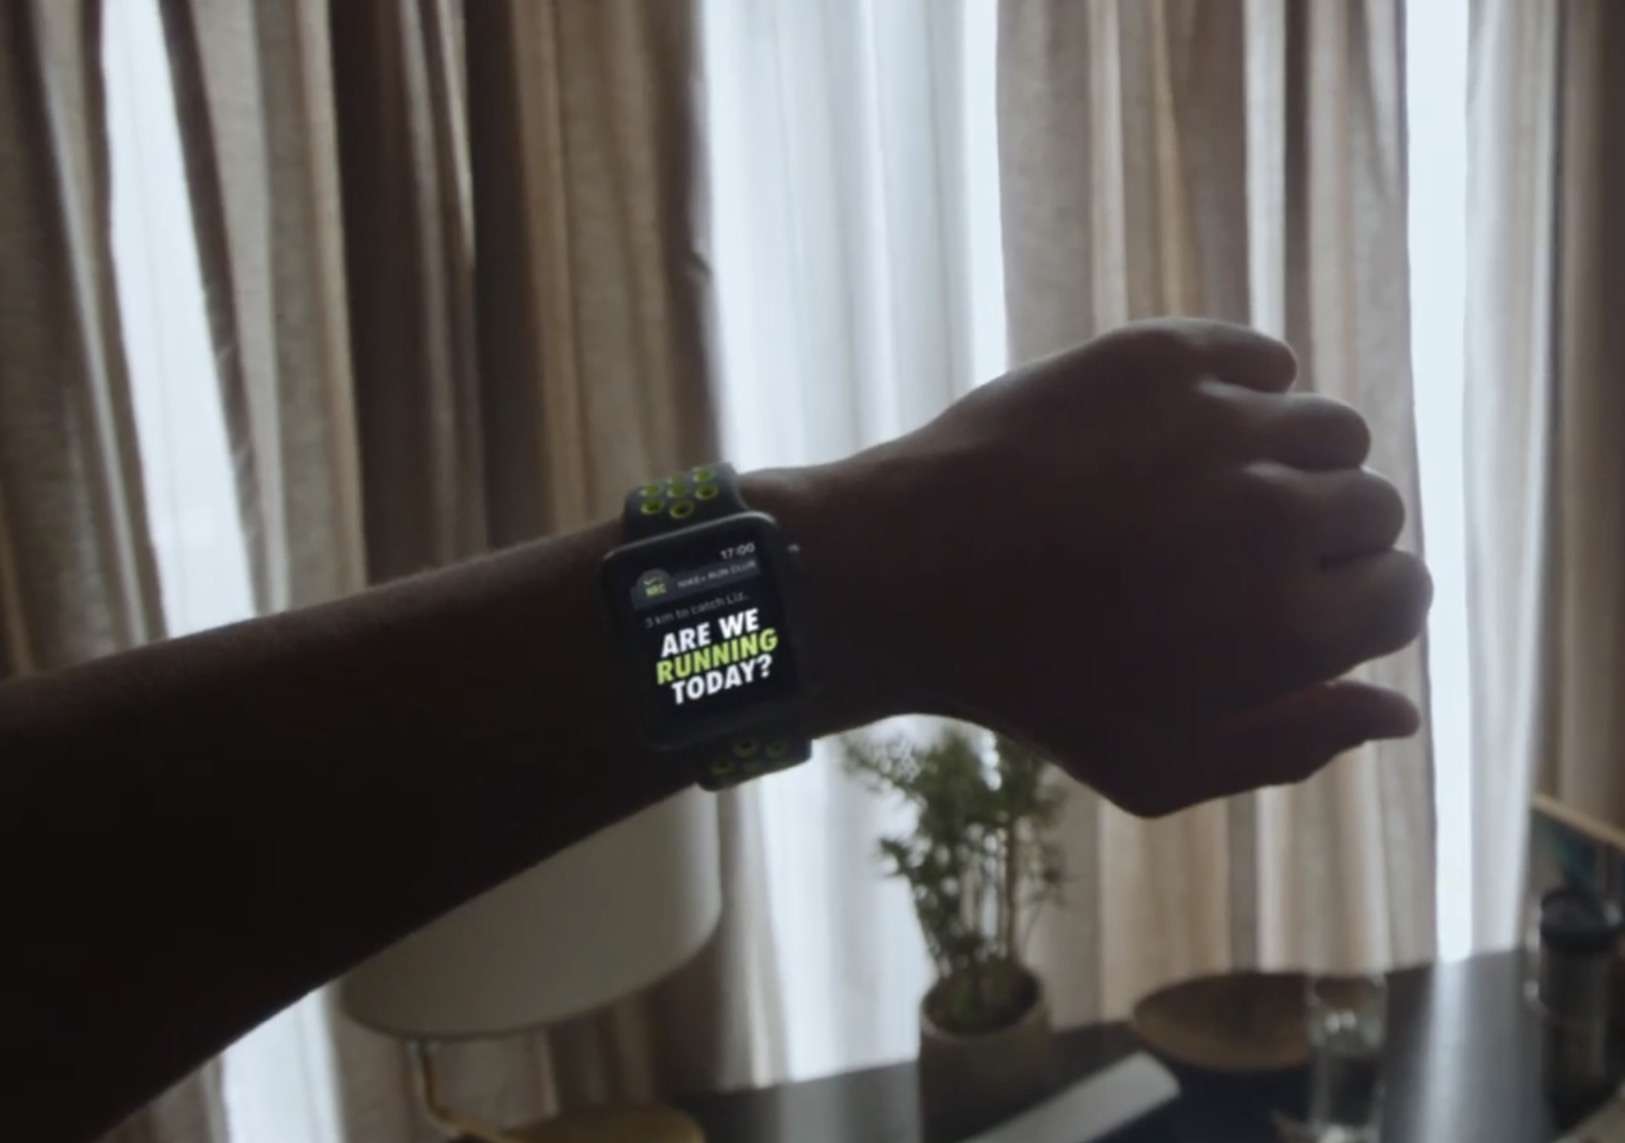 Runners will love the Nike+ version of Apple Watch.